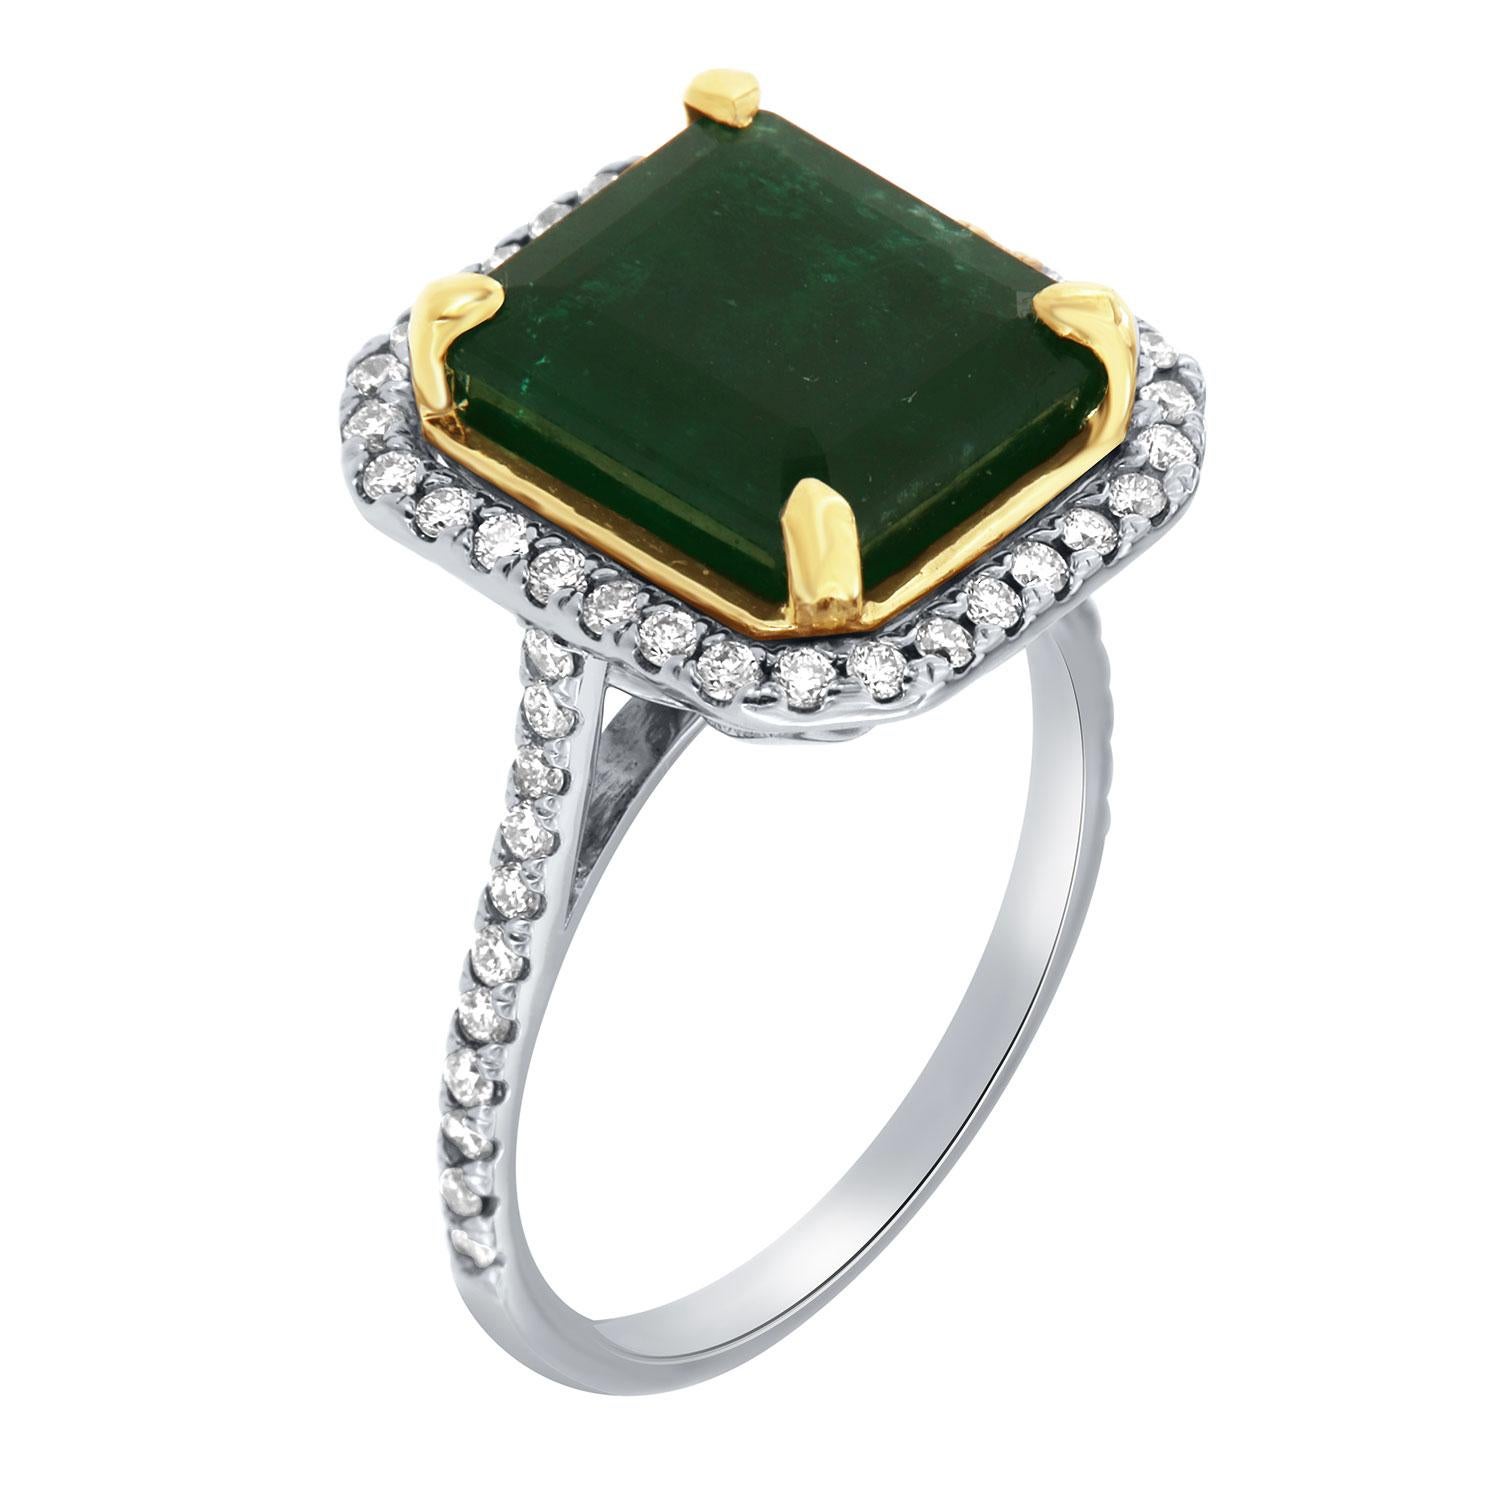 This 14K White and Yellow gold ring feature a 4.52 Carat Emerald cut Natural Green emerald from Zambia. Excellent deep green color. The emerald is encircled by a halo of brilliant round diamonds on a 1.5 mm band. The diamonds are Micro-Prong set on